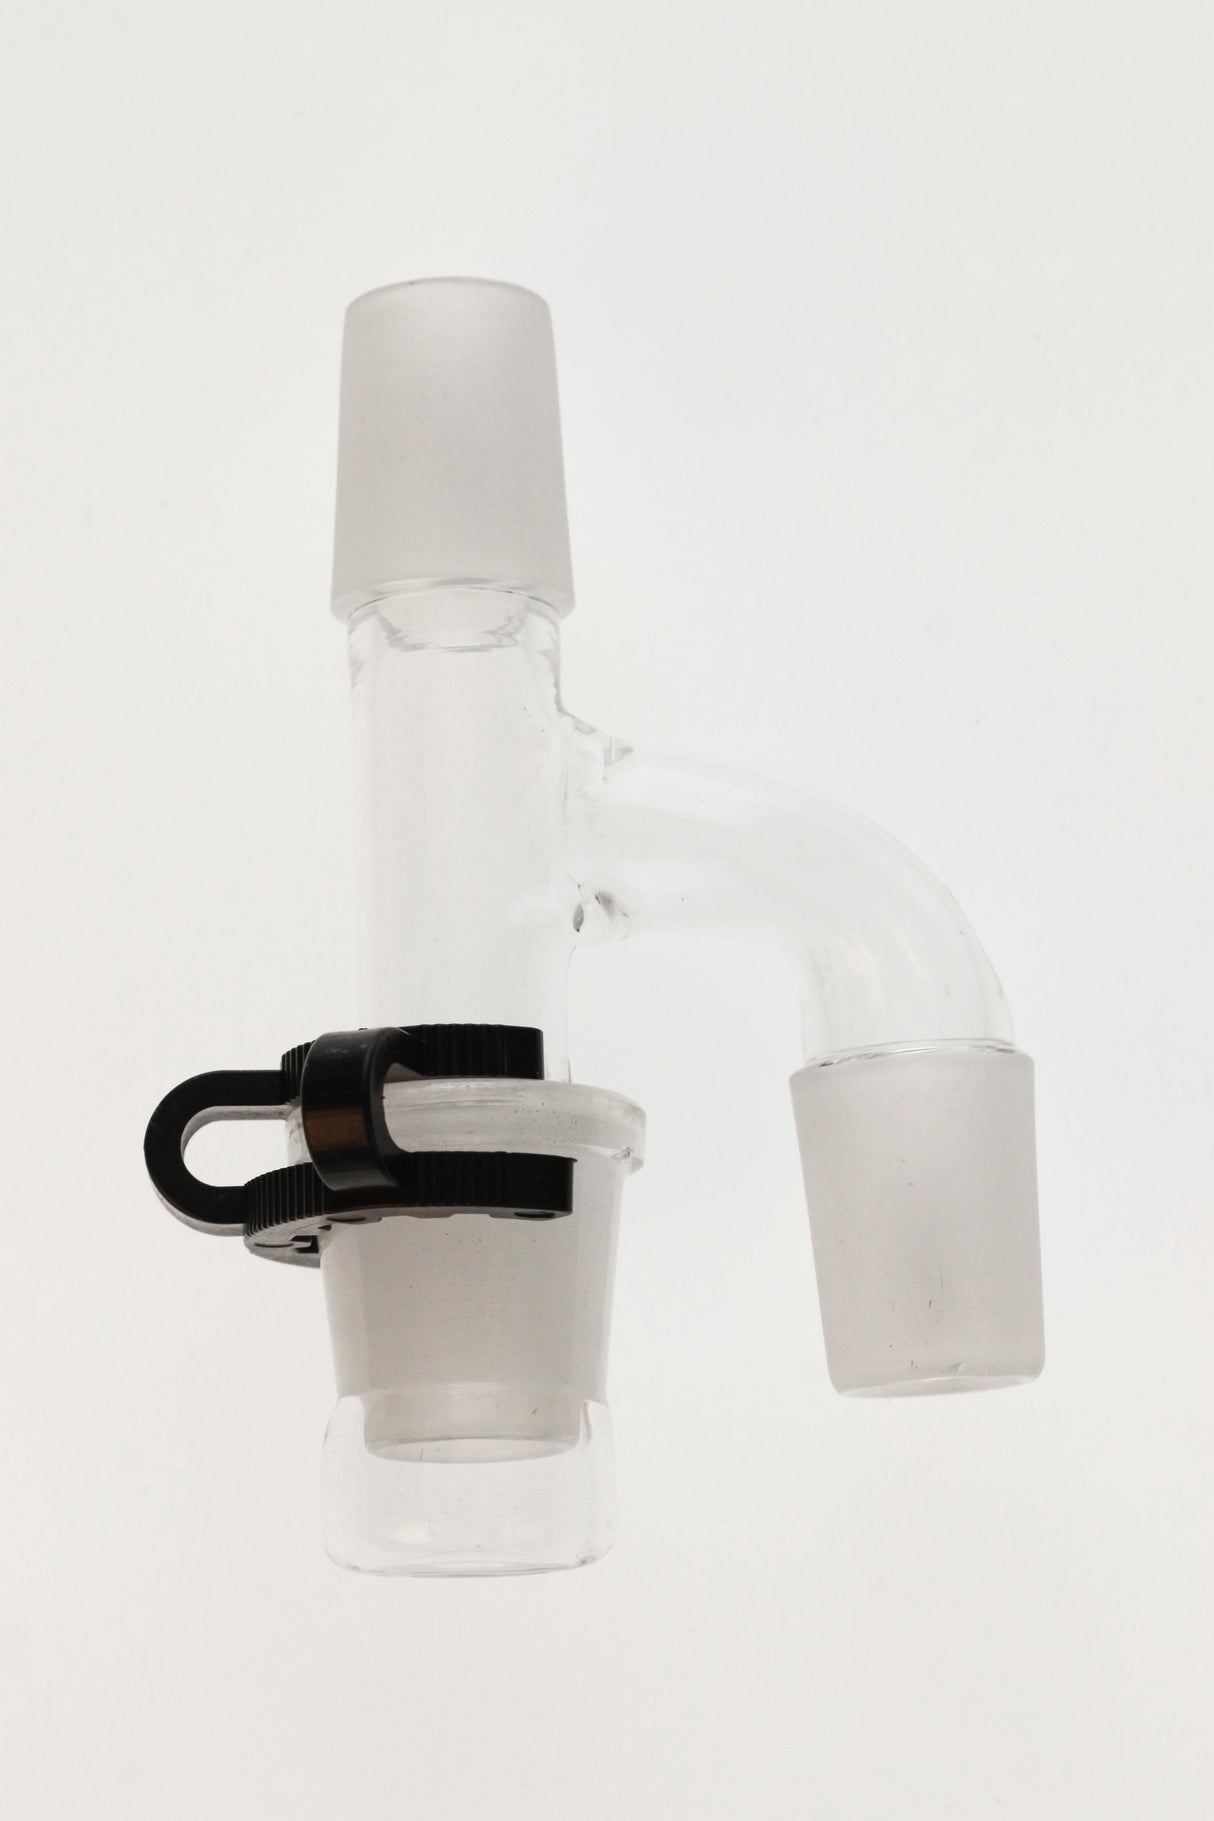 TAG - Clear Reclaim Adapter with Dish & Keck Clip for Bongs, 14-18mm Female Joint - Side View